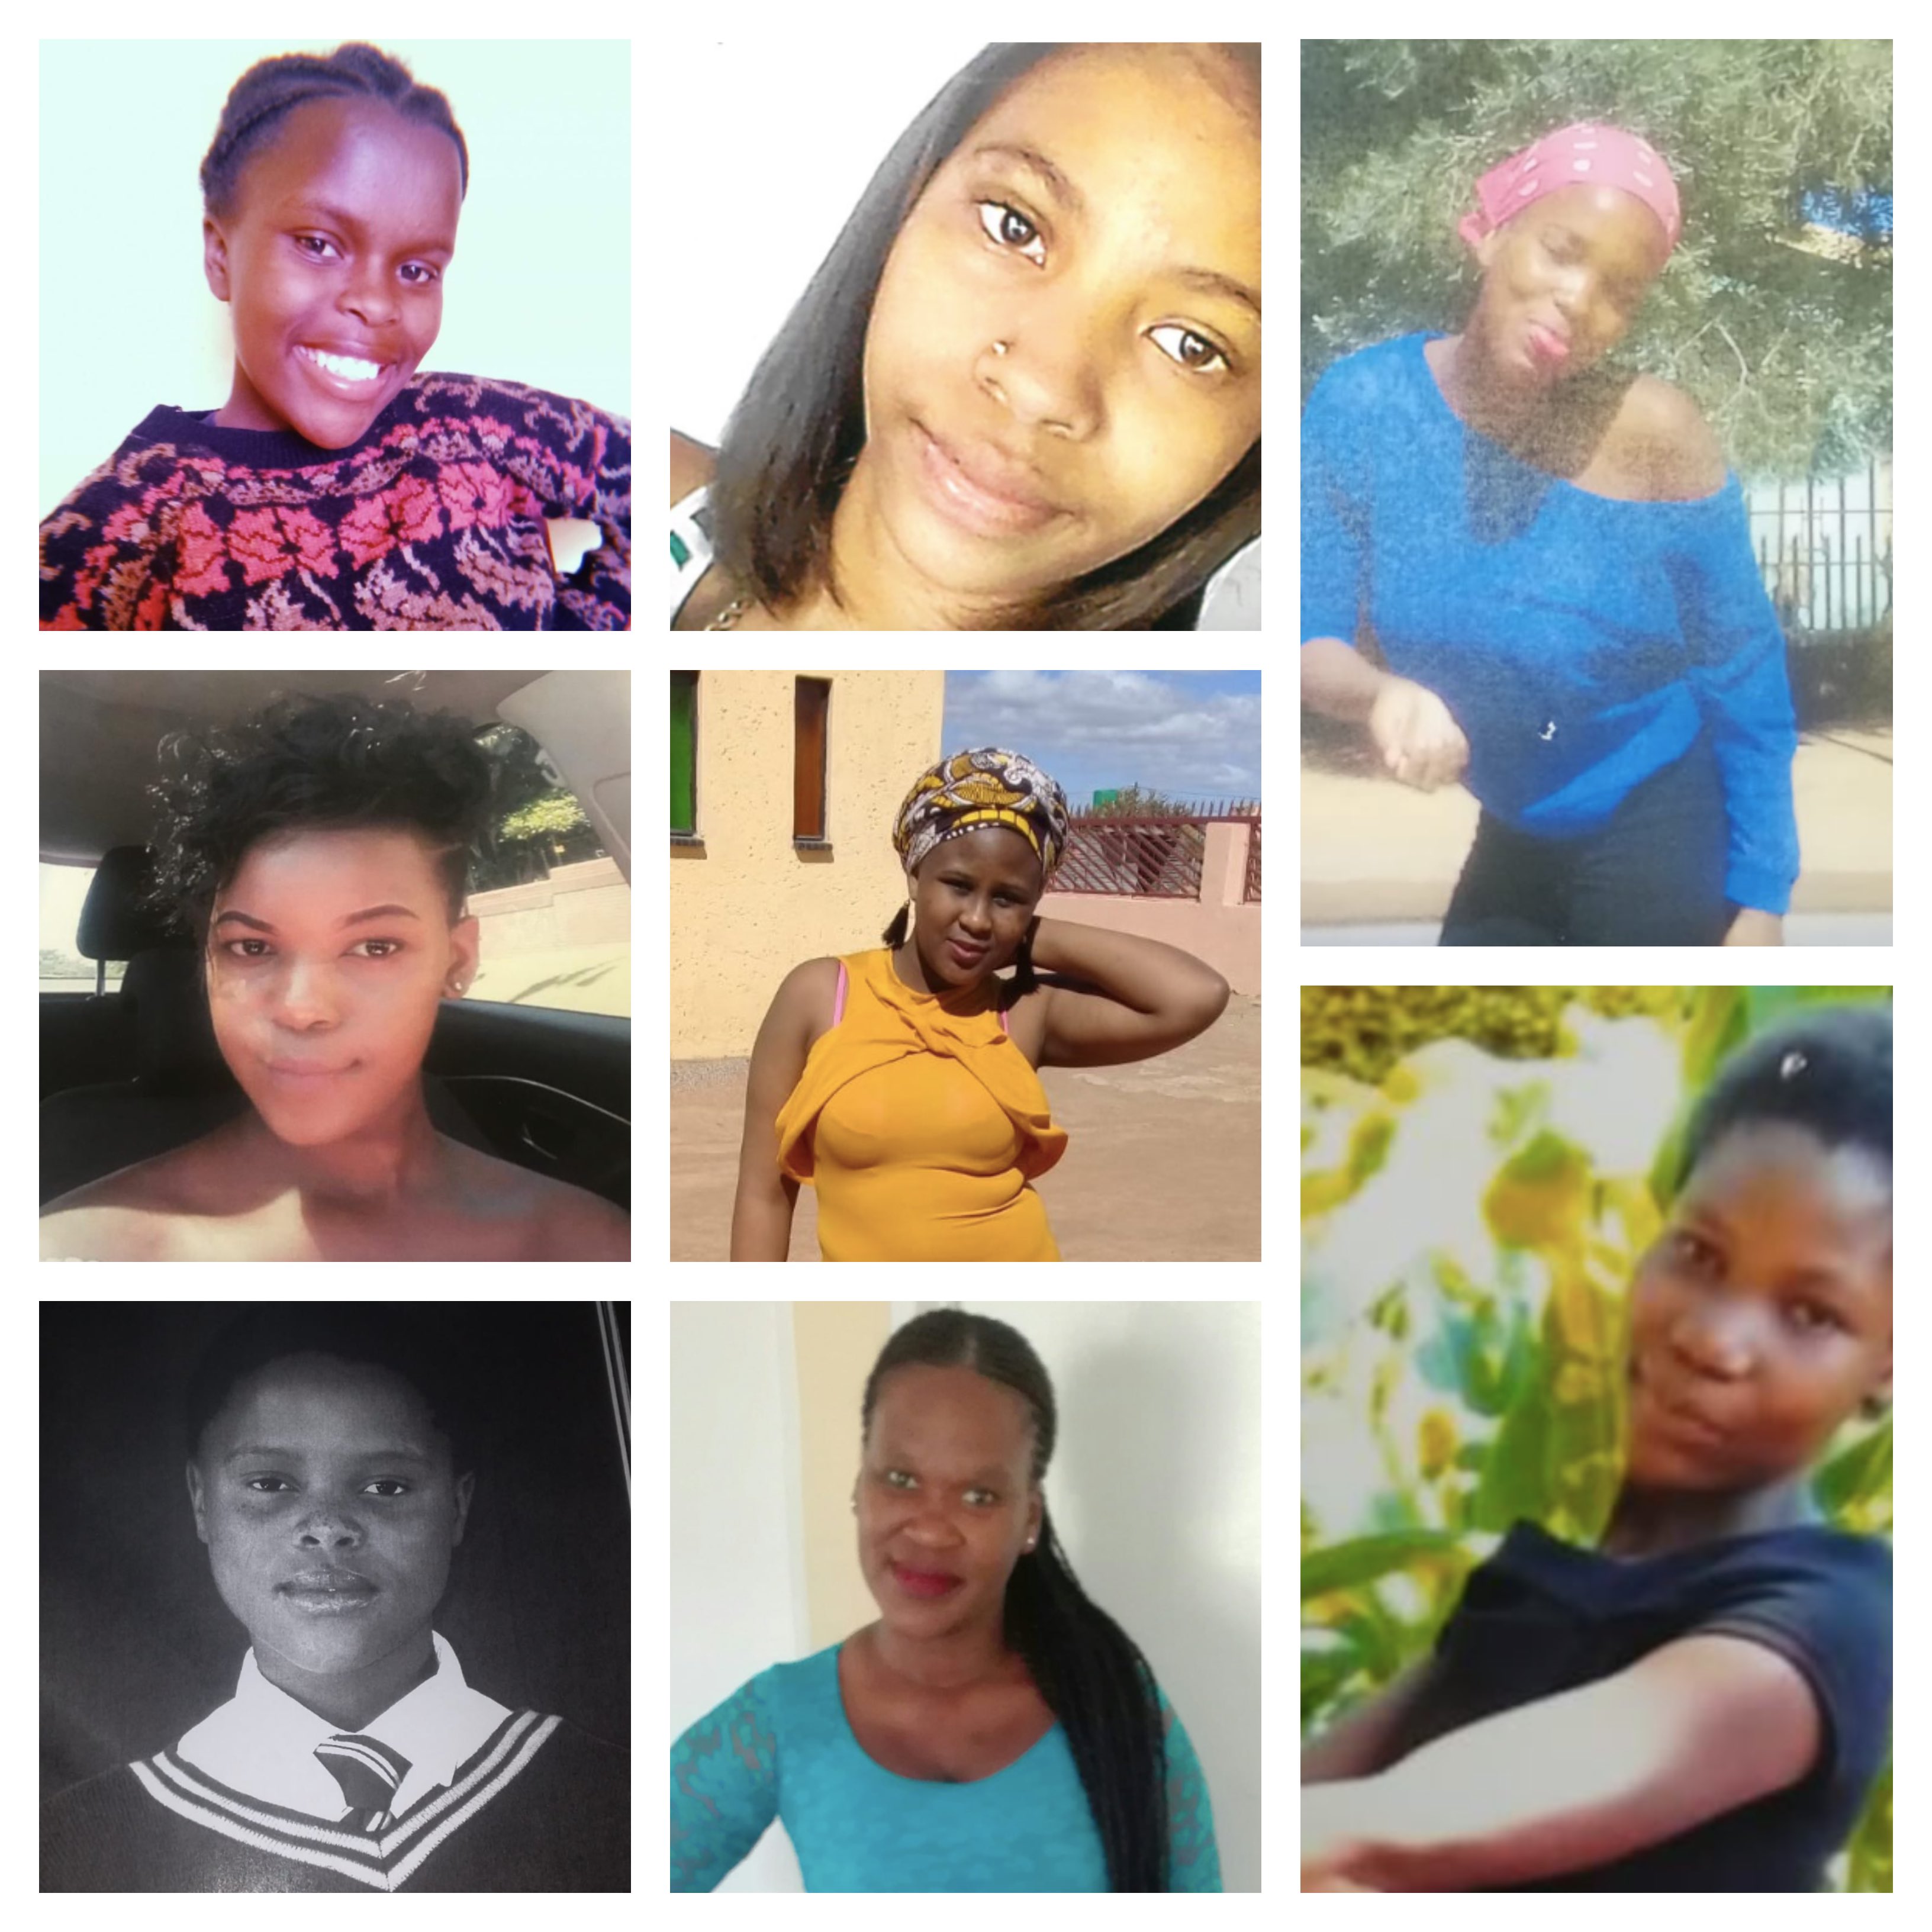 10 South African Girls and Women Who Are Currently Missing